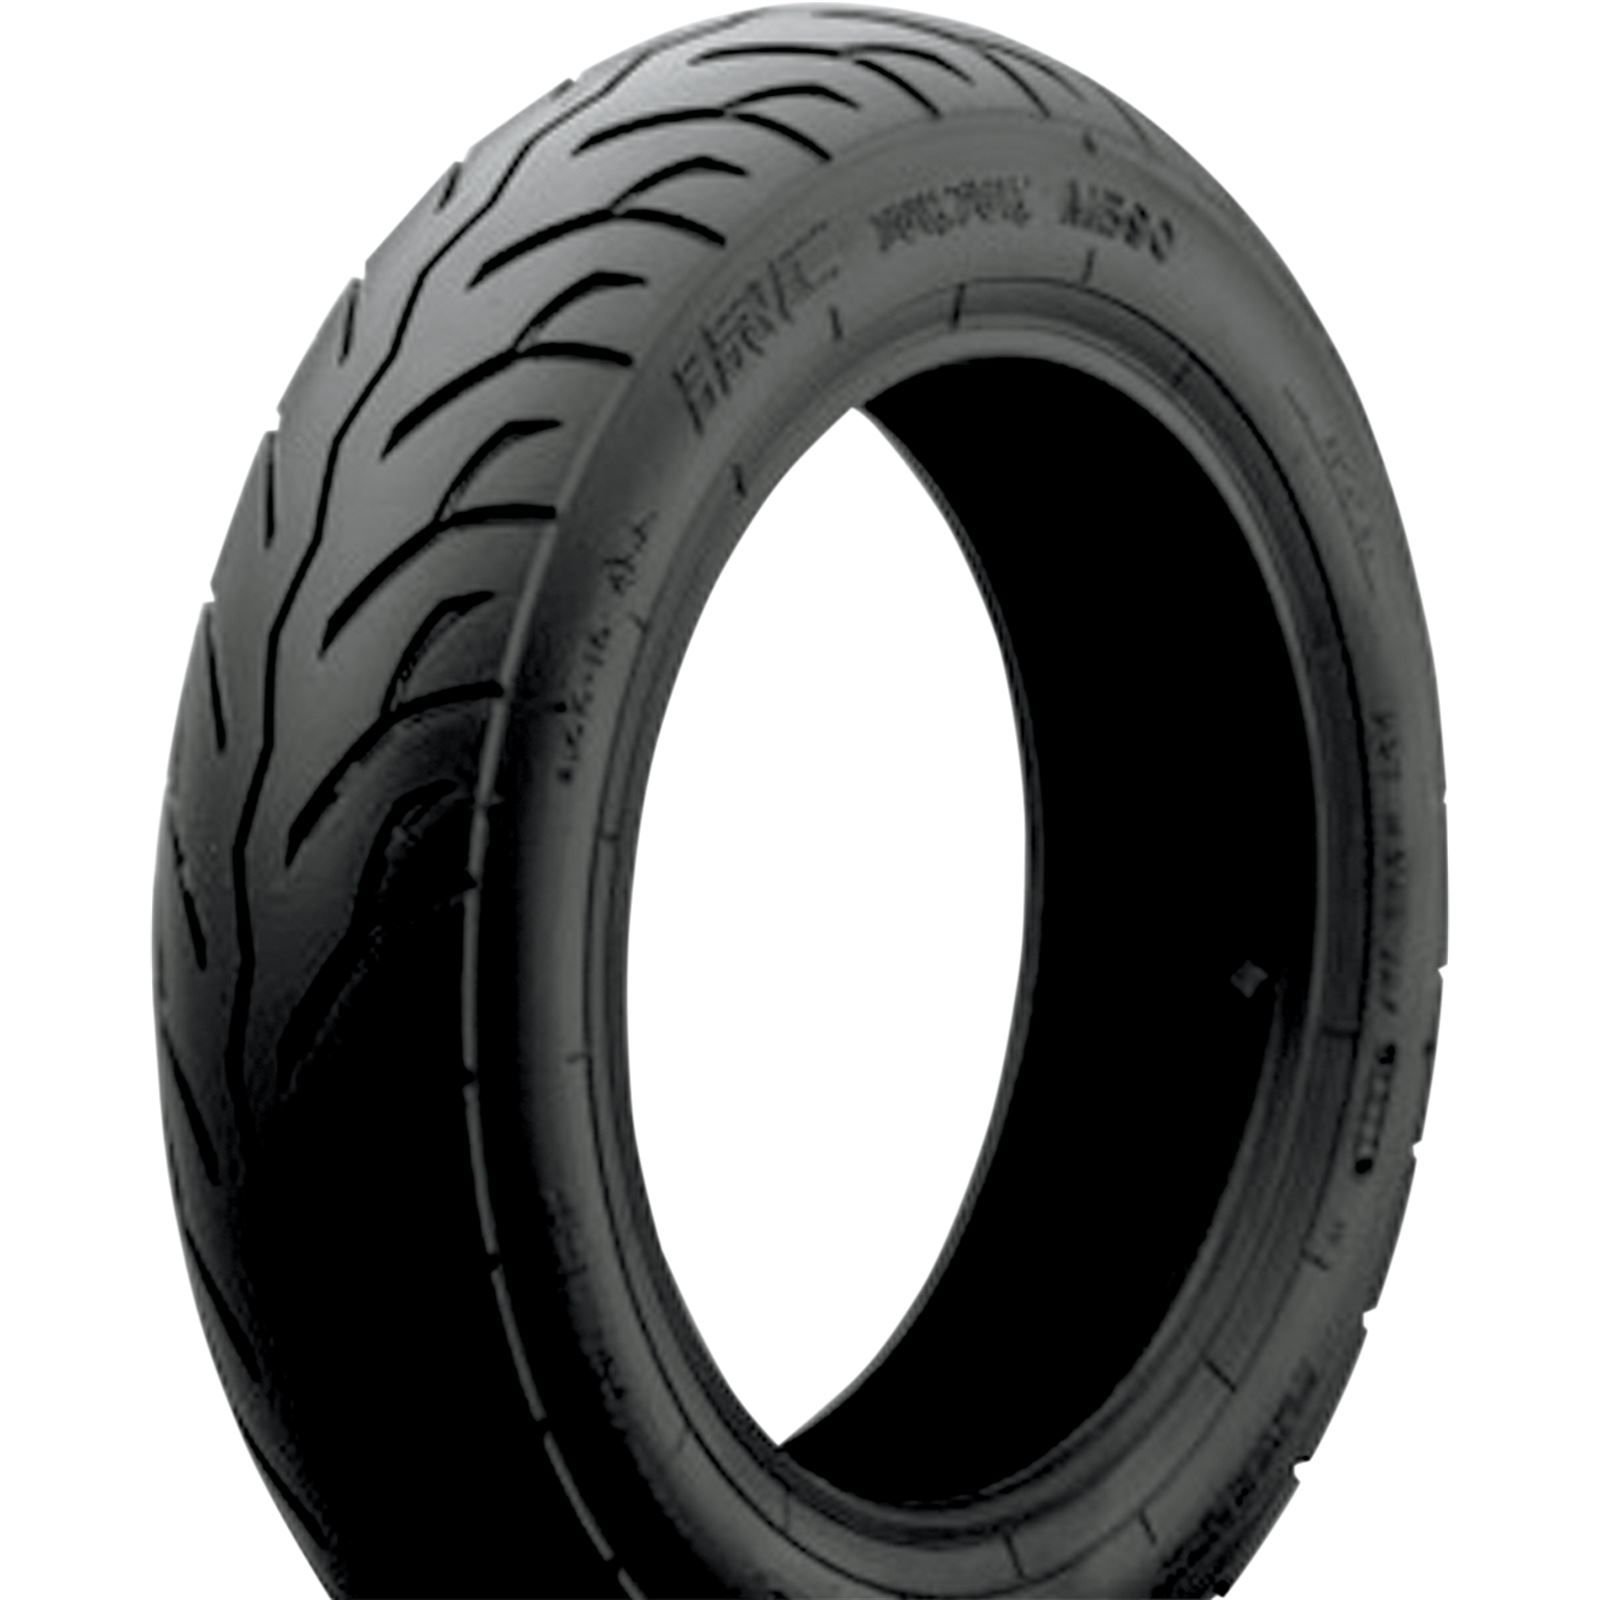 1 New 3.00-10 Scooter Tire 4 Ply Tubeless Front or Rear FREE Shipping